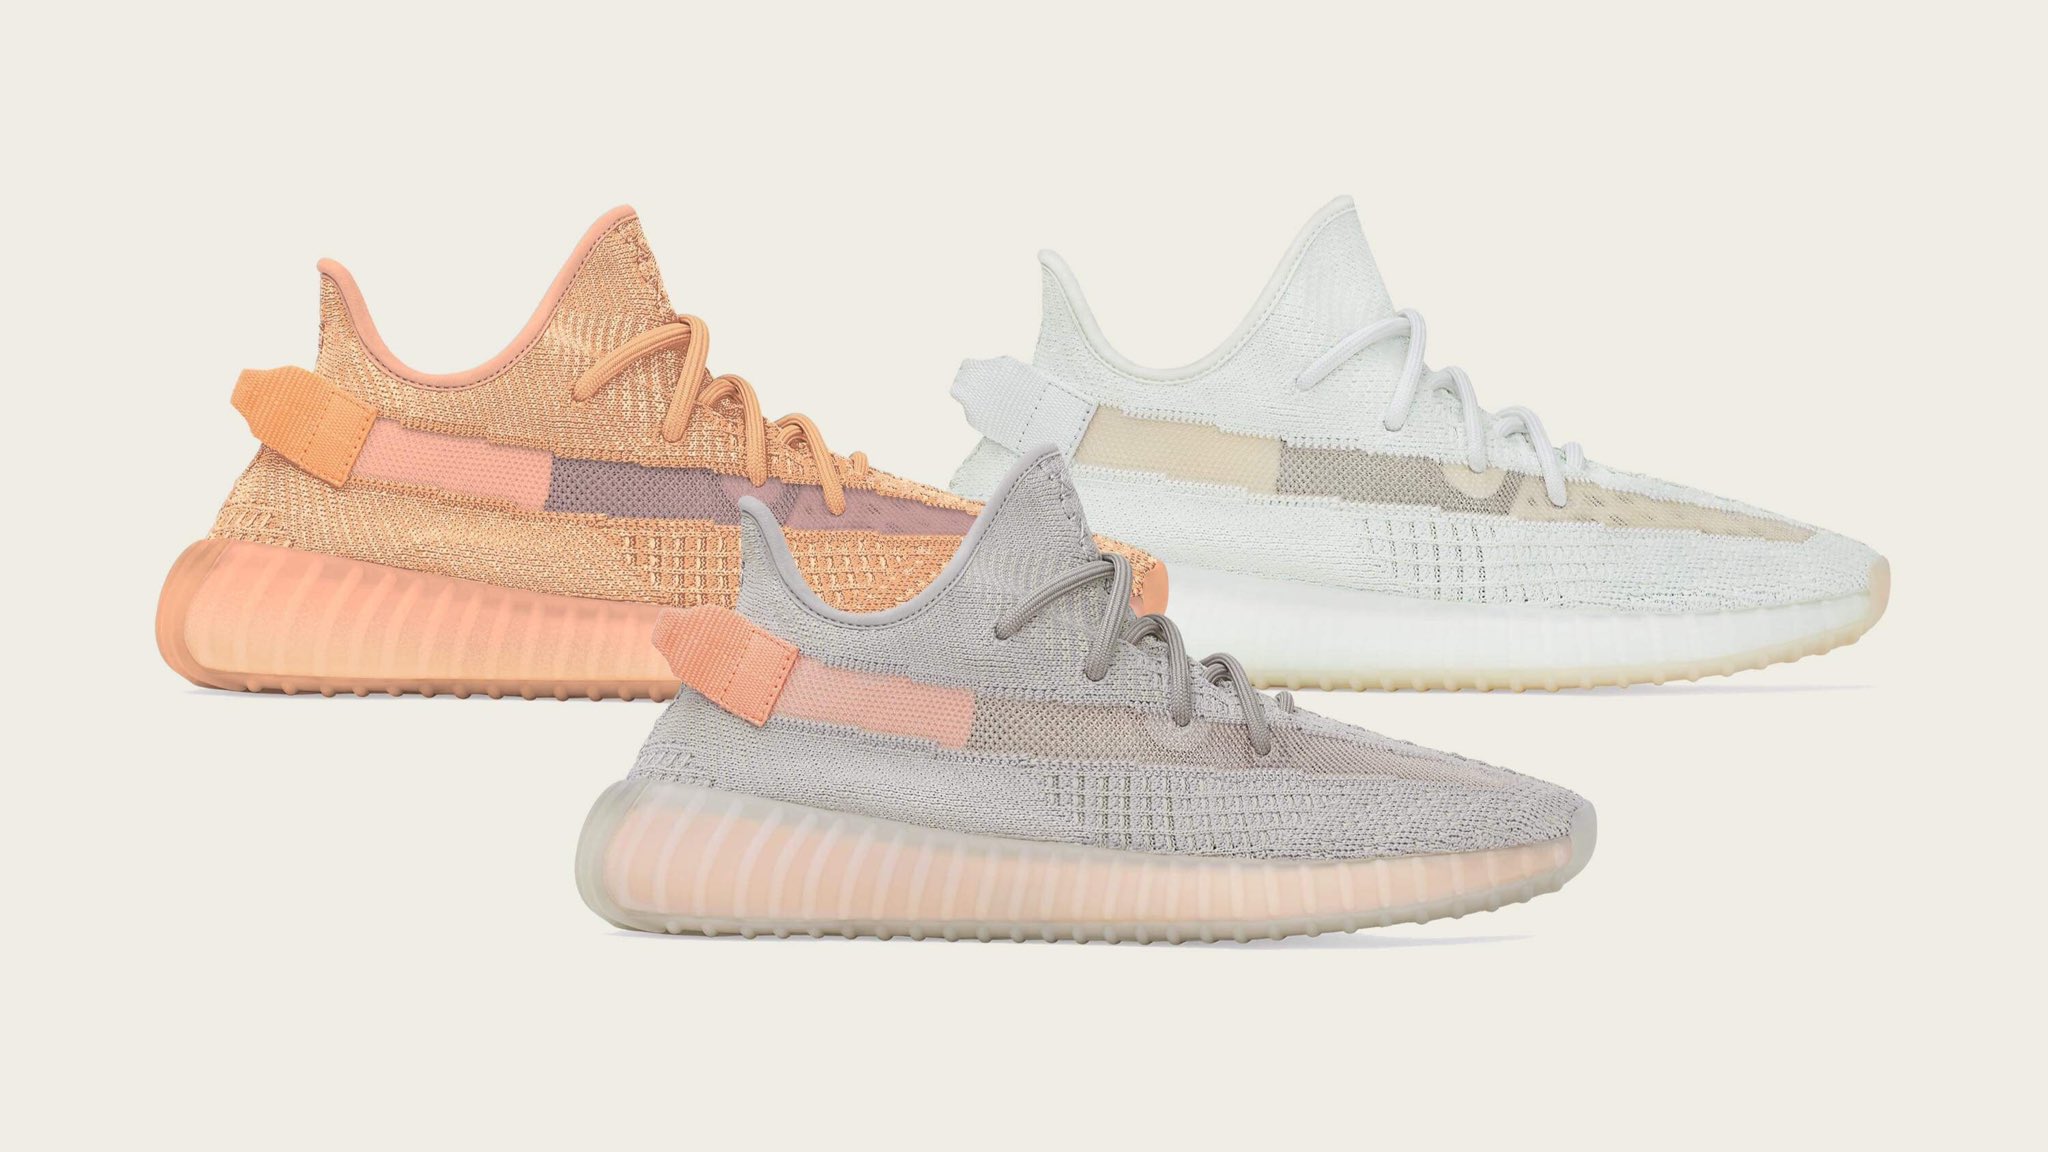 YEEZY MAFIA on Twitter: "PRE-ORDER THE YEEZY BOOST 350 V2 NOW ON https://t.co/vpizmqzed1 LIKE COMMENT YOUR SIZE FOR A CHANCE TO WIN THE 3 PACK https://t.co/FEb2Ccmlfp" / Twitter